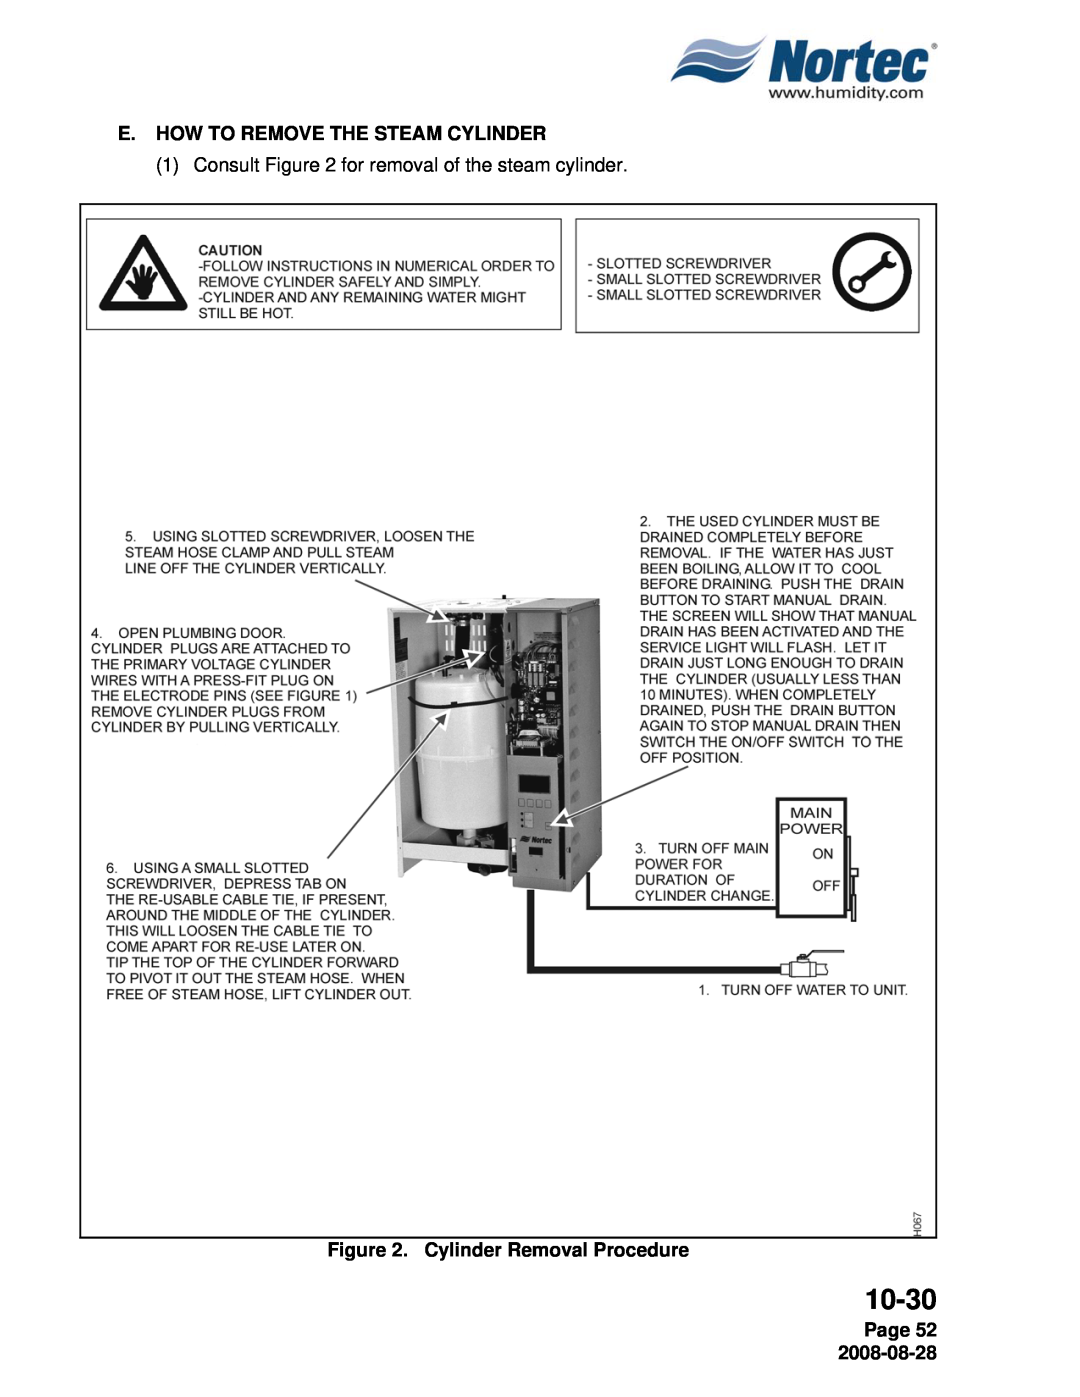 Nortec NH Series installation manual E.How To Remove The Steam Cylinder, Cylinder Removal Procedure, Page 52, 10-30 